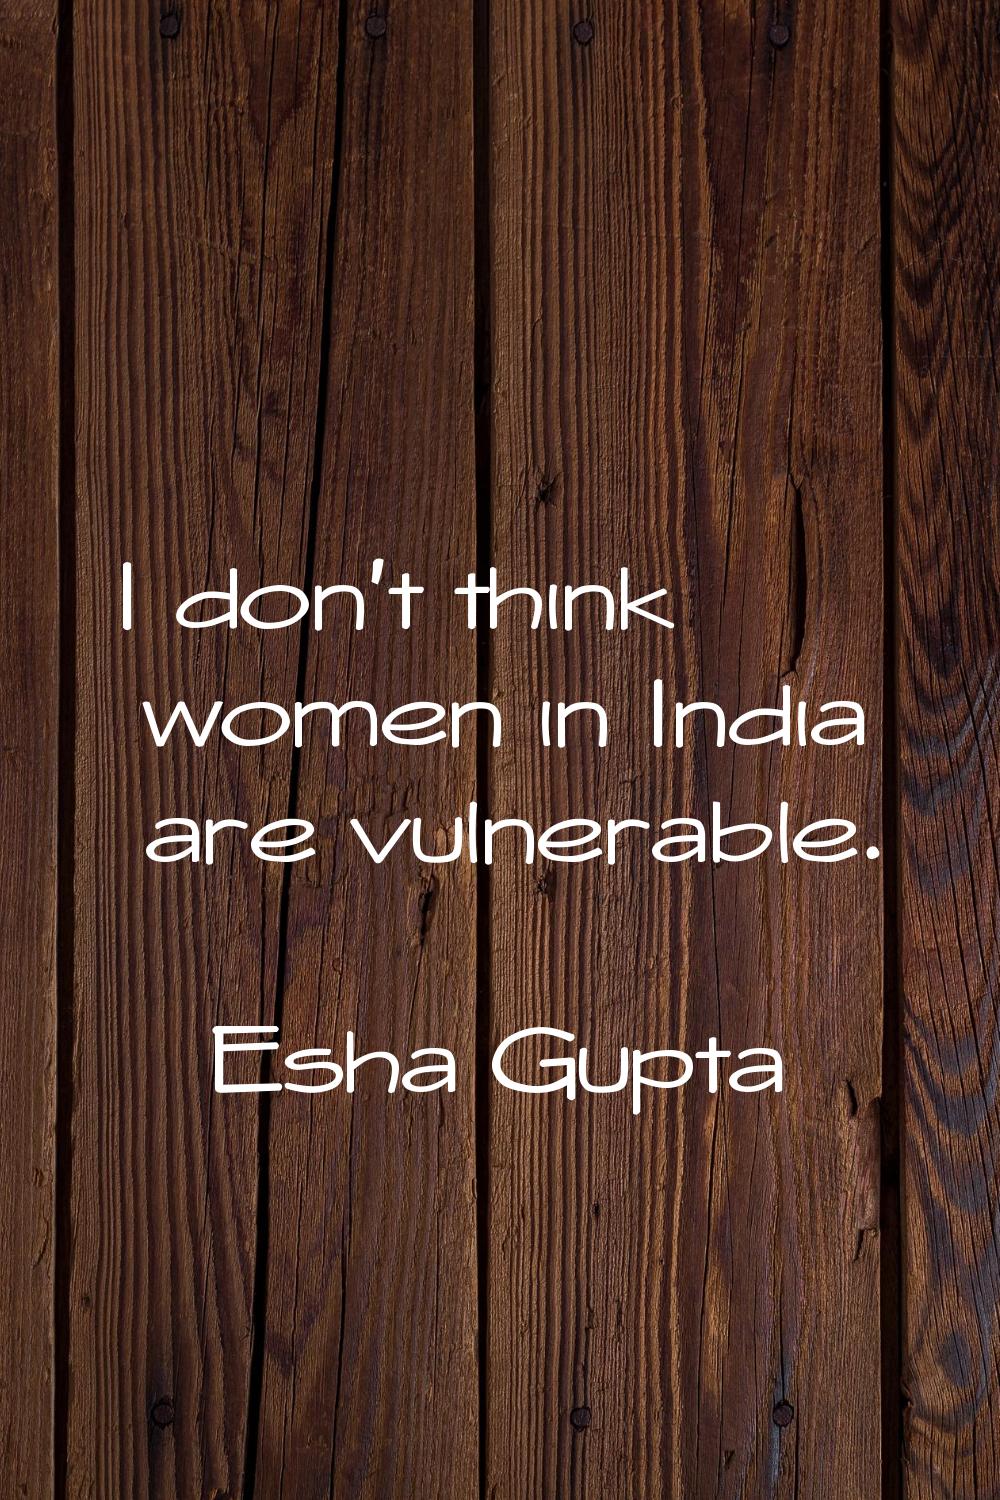 I don't think women in India are vulnerable.